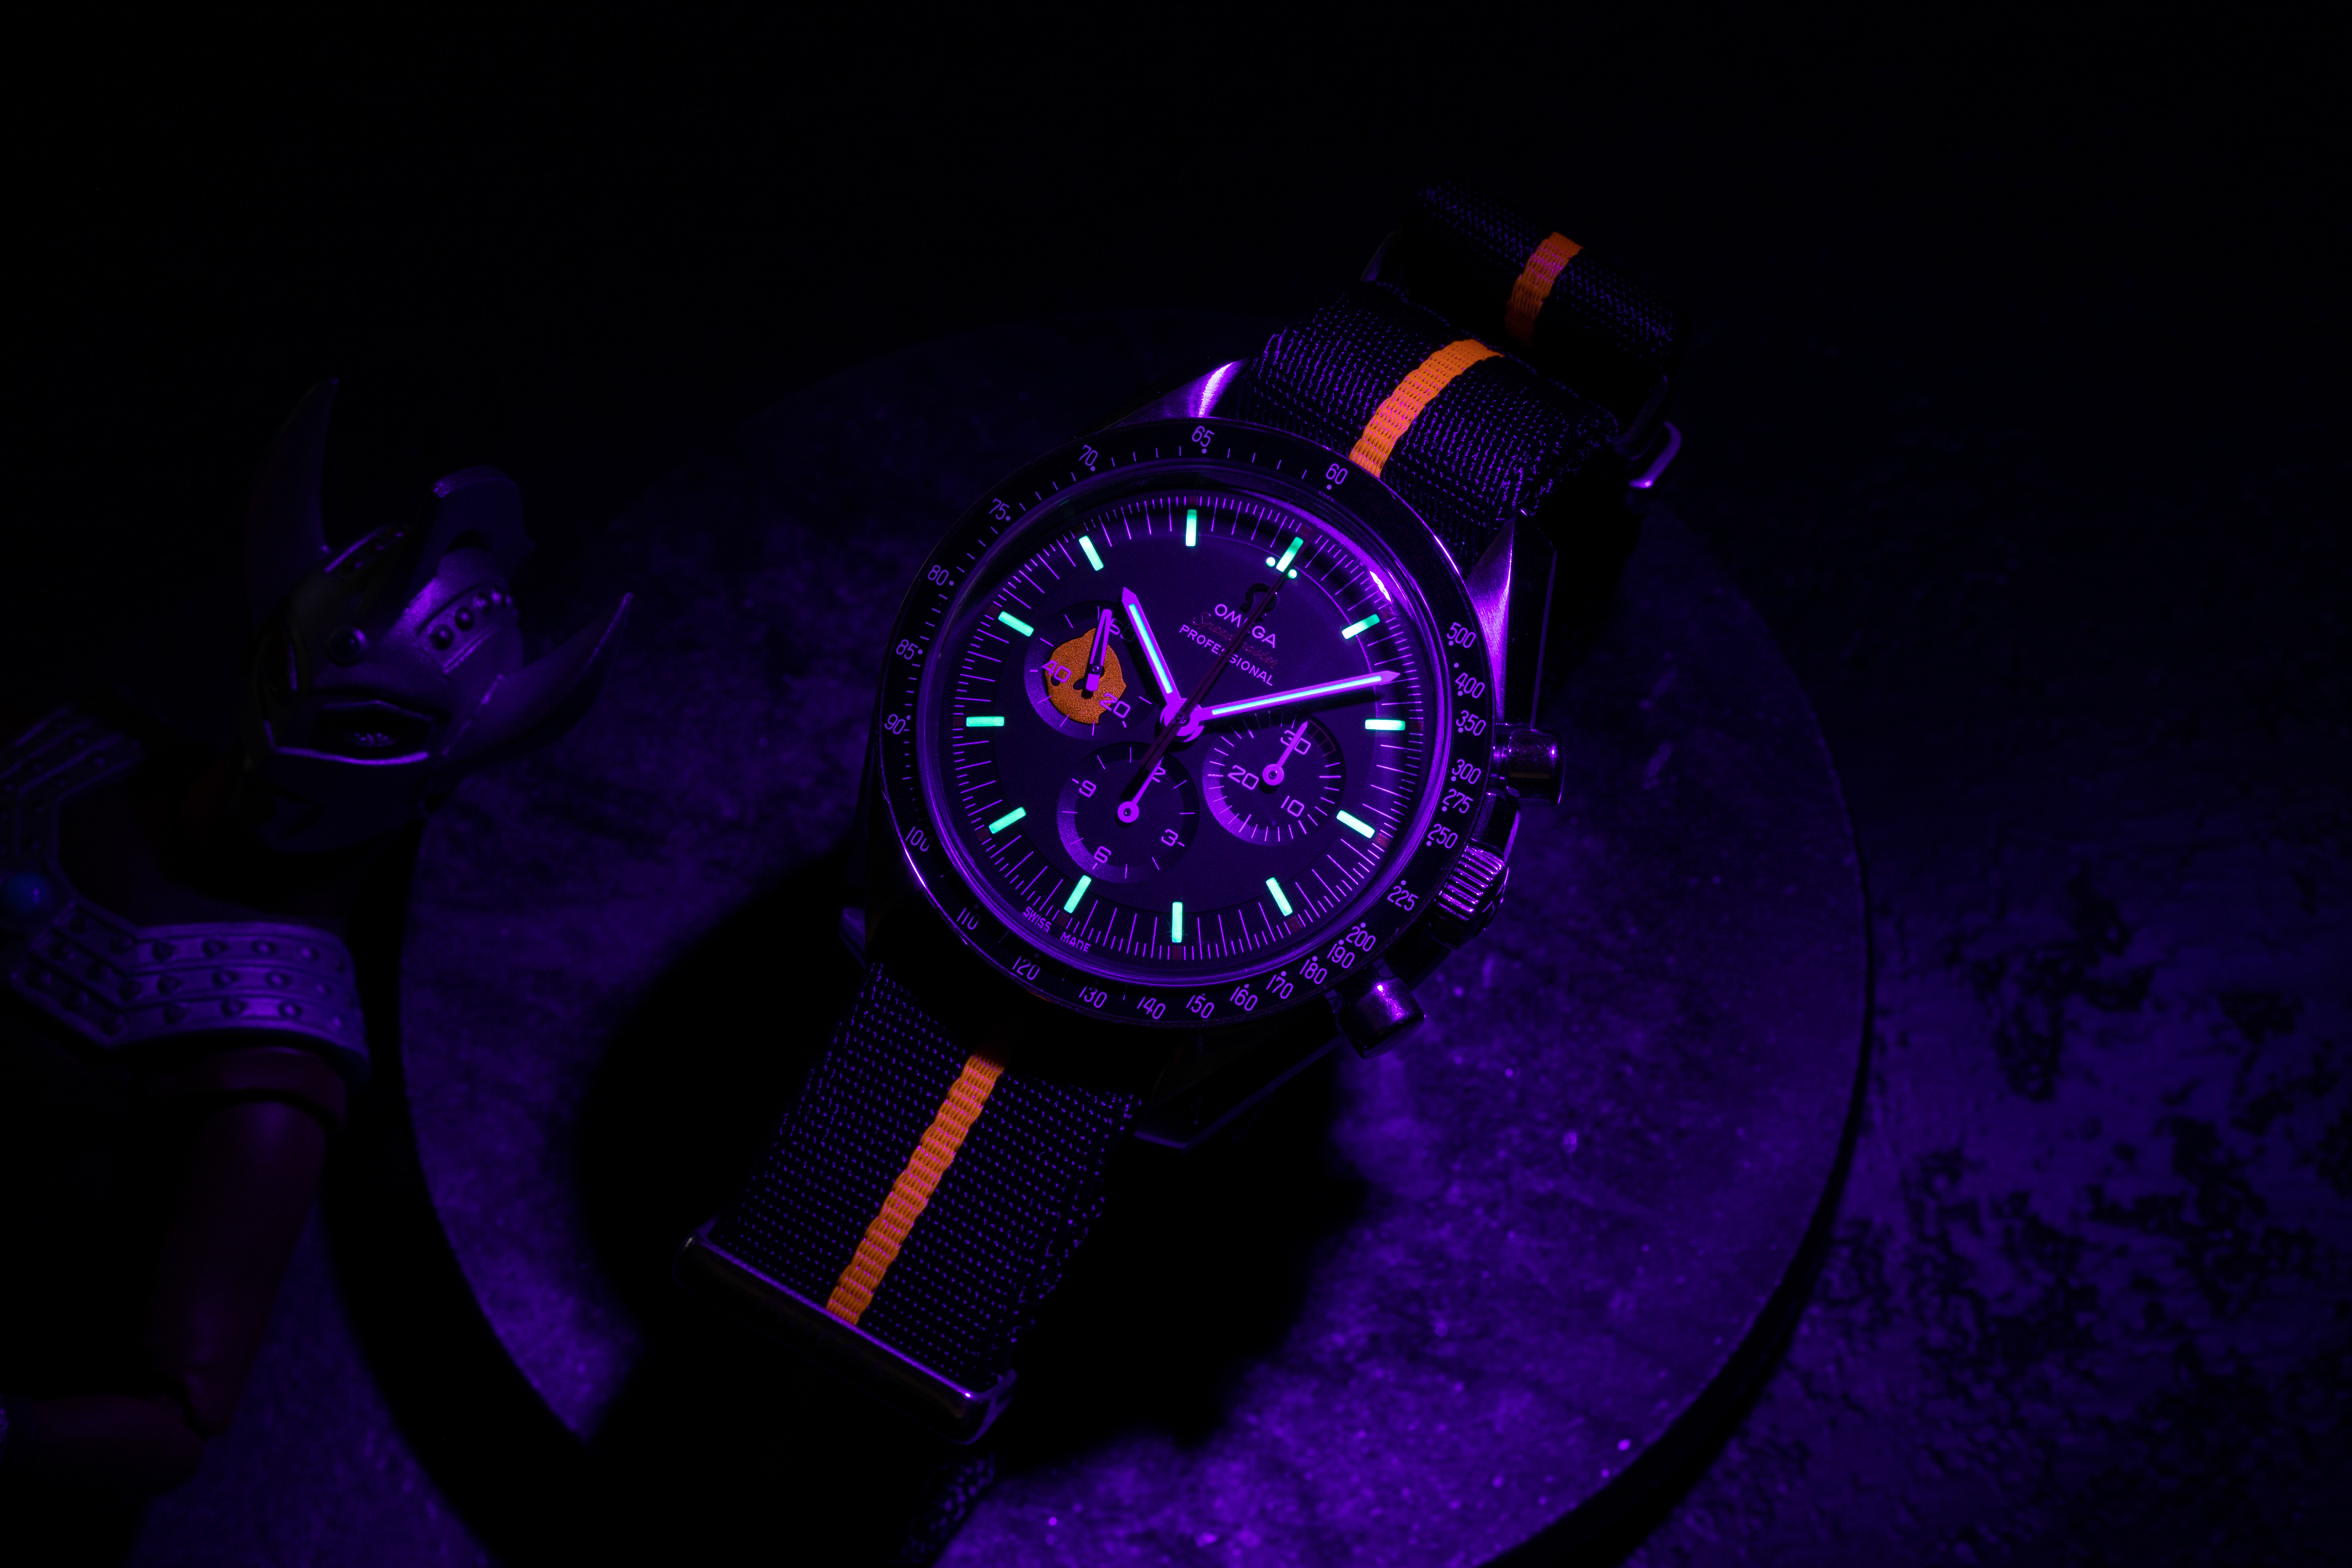 The hidden luminous Ultraman silhouette painted inside the continuous seconds marker can be seen only when a UV light used on the 2018 Speedmaster Limited Edition 42mm "Ultraman" , while in the dark